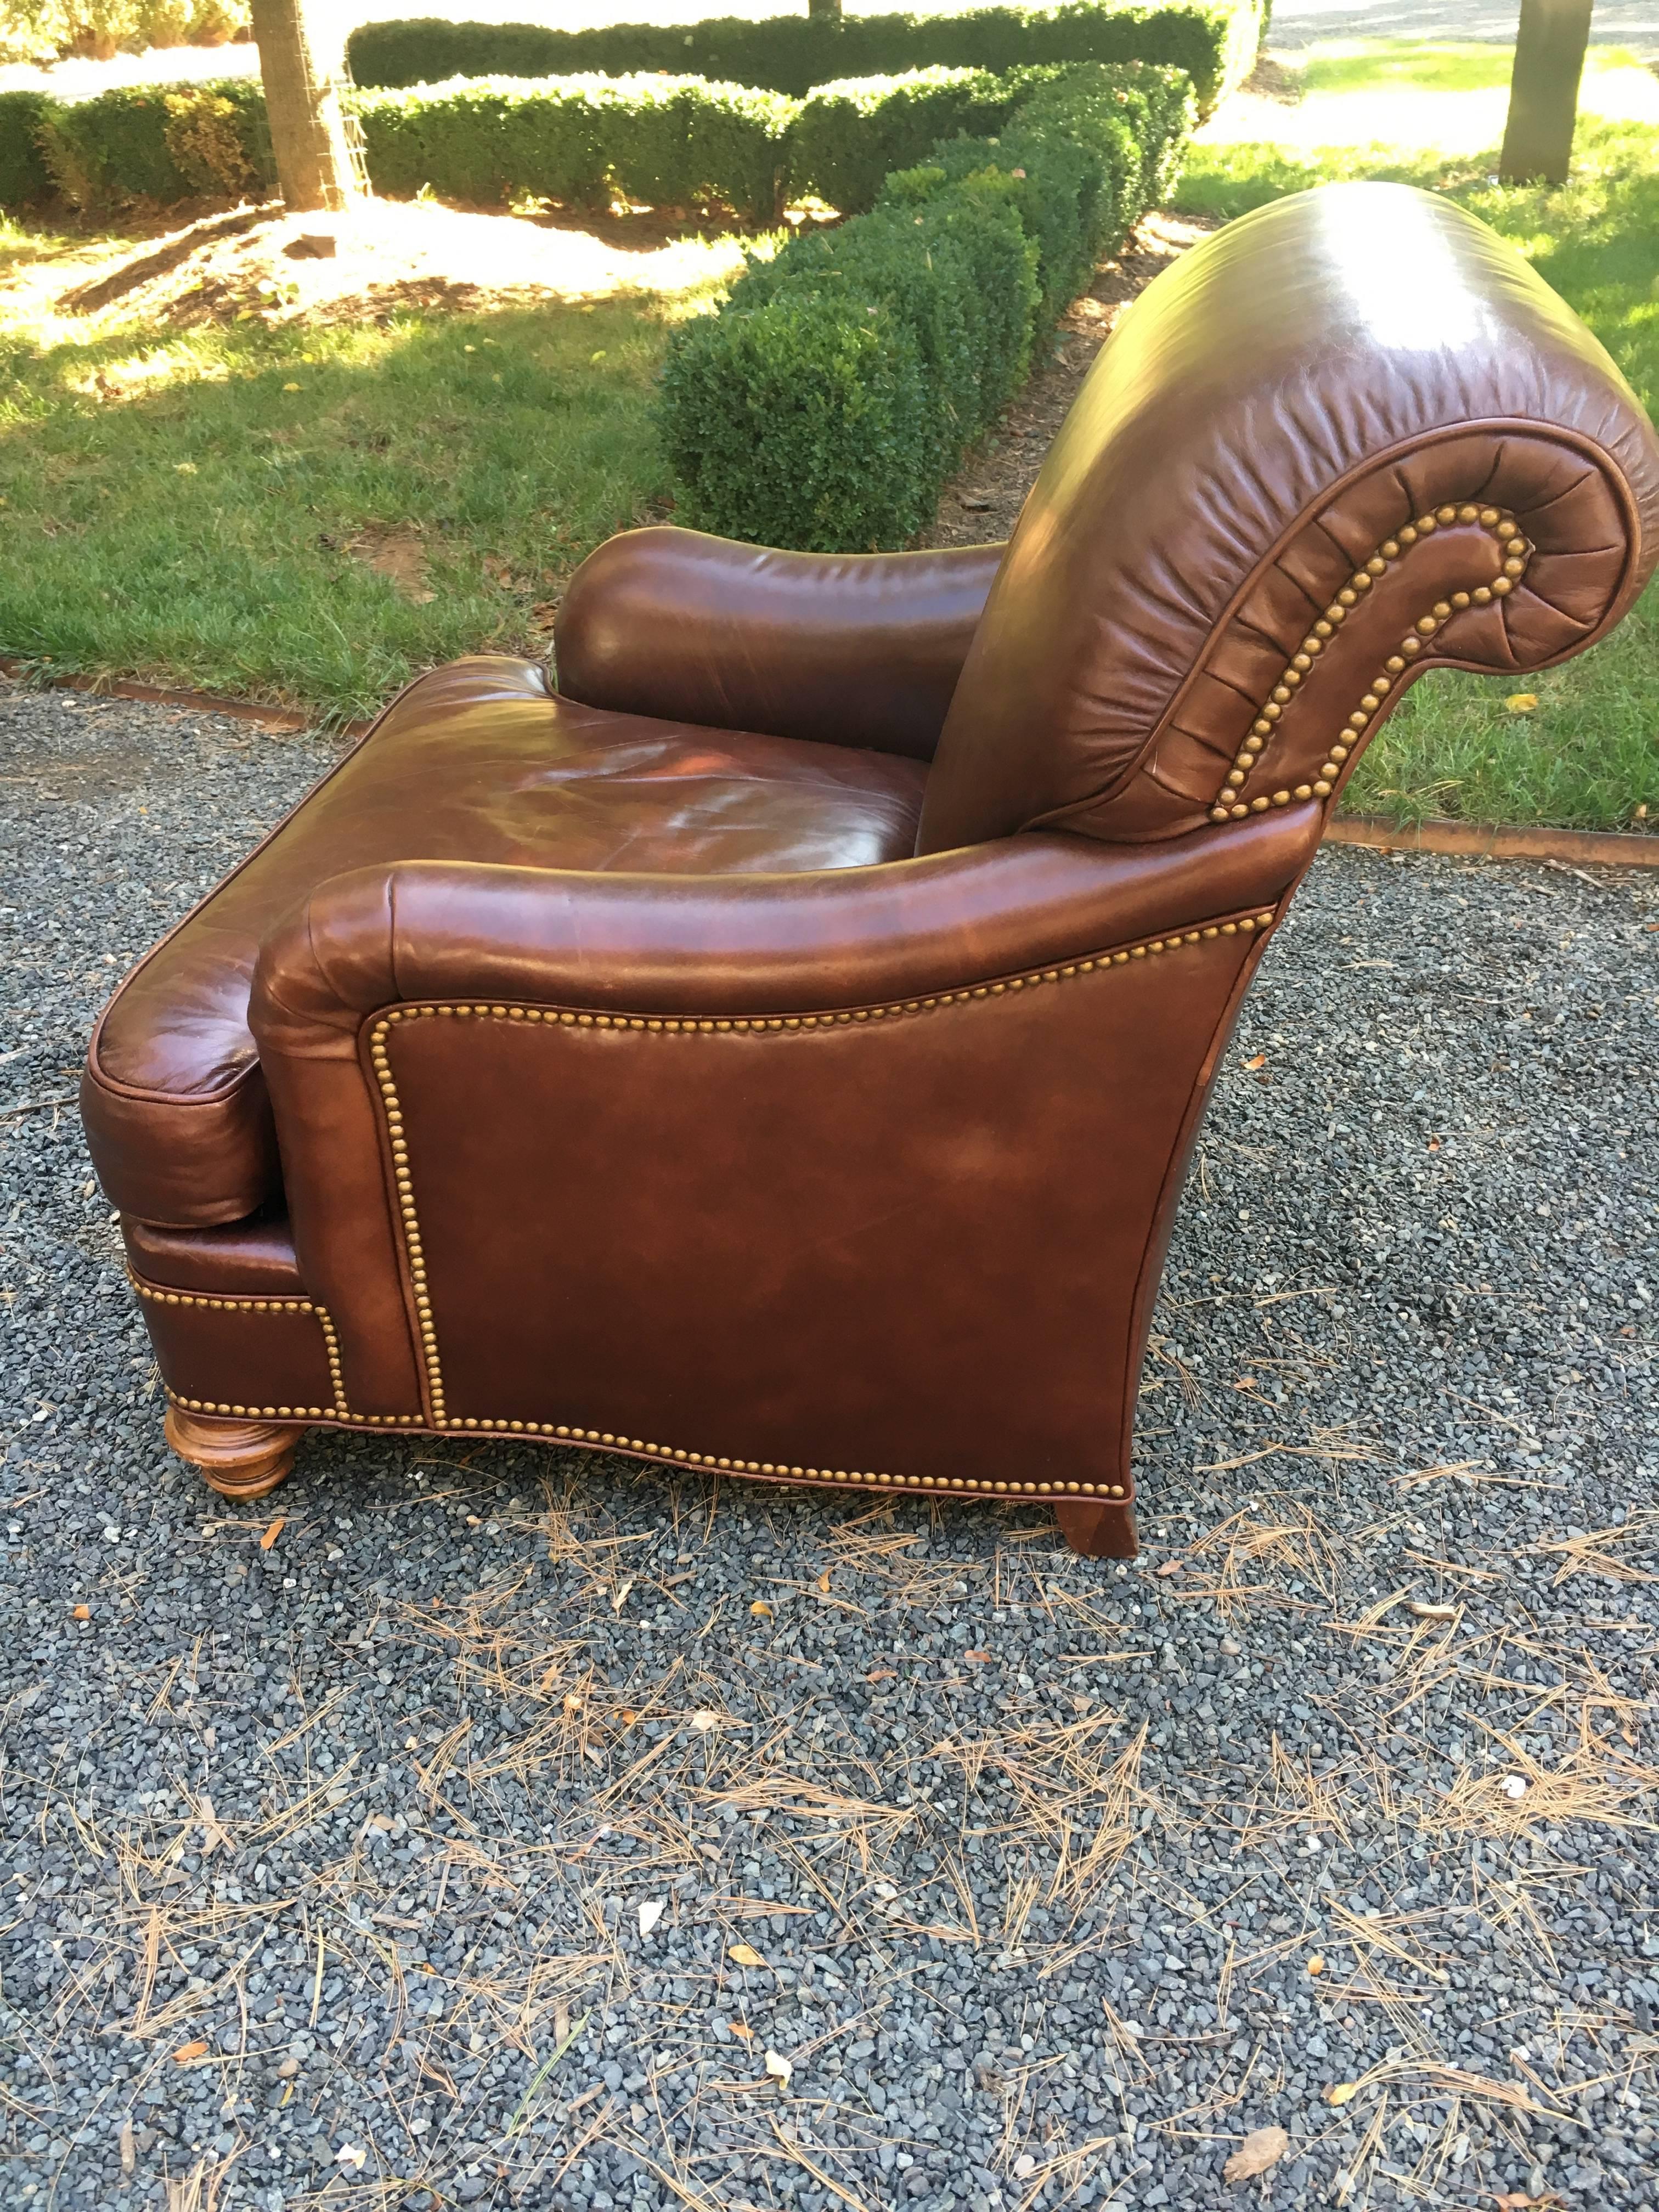 Sumptuously soft chocolate brown leather club chair and ottoman by Hickory Chair (for Greenbaum's.). A classic design, the chair and ottoman have turned mahogany legs on casters and bronze nailhead trim. Measures: seat height 18 (with cushion), seat